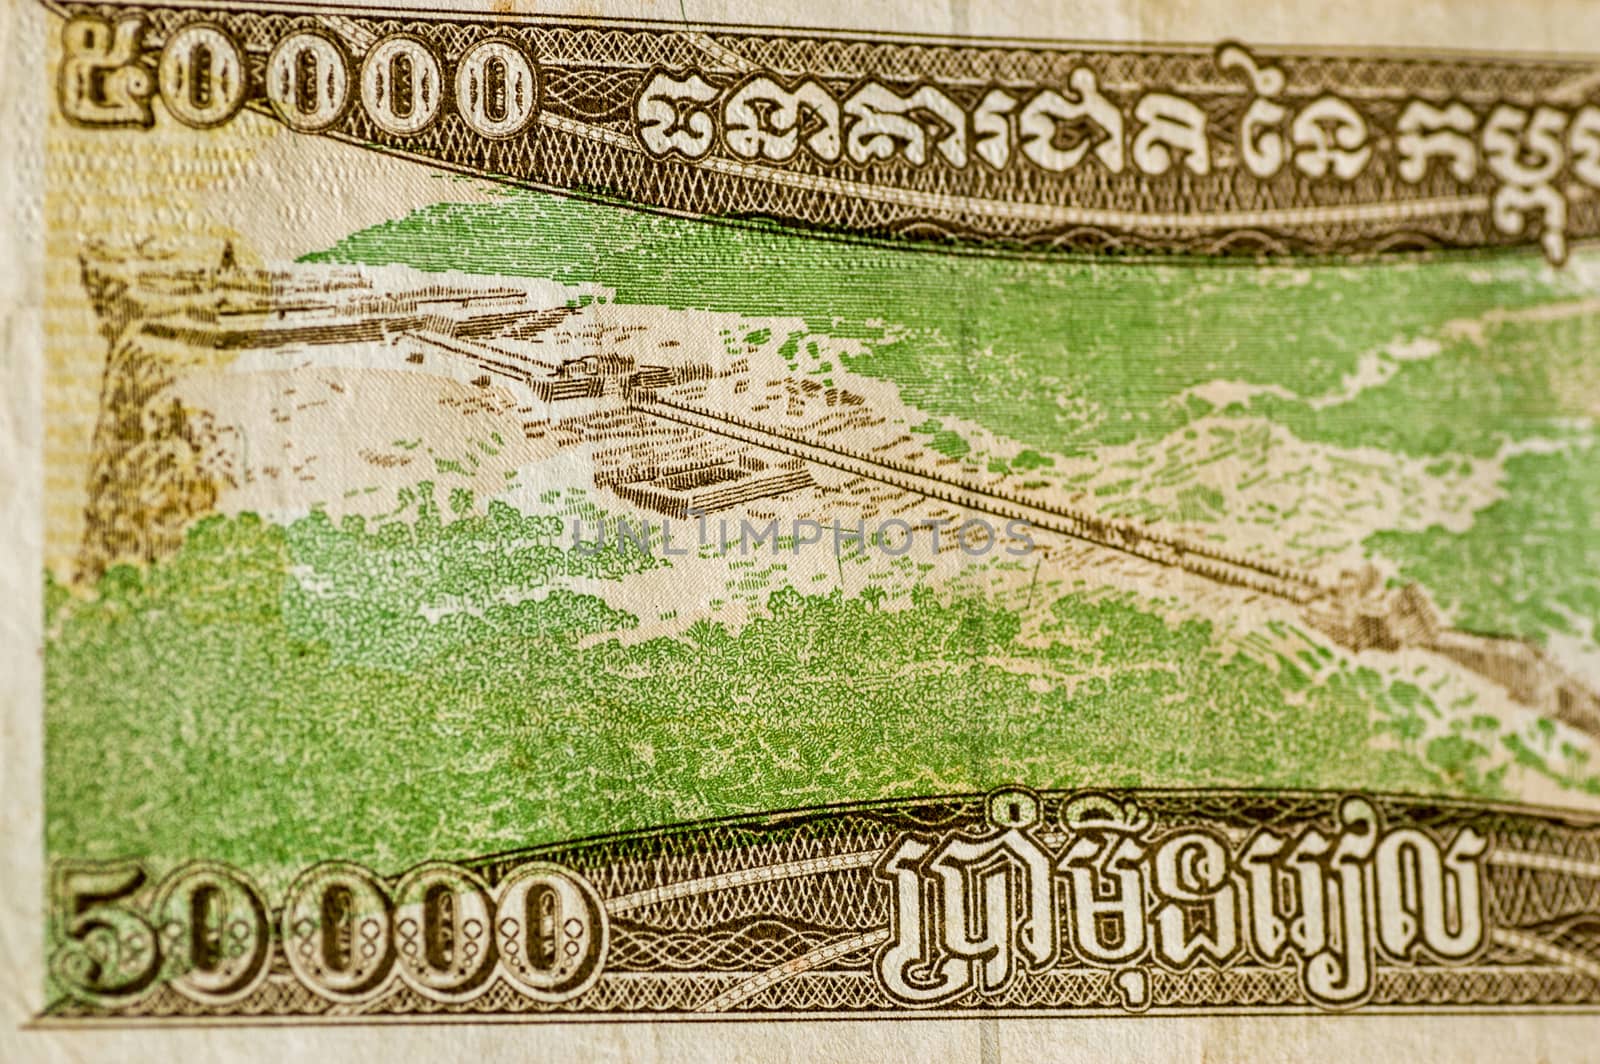 Road to Preah Vihear Temple on Cambodian banknote by BasPhoto